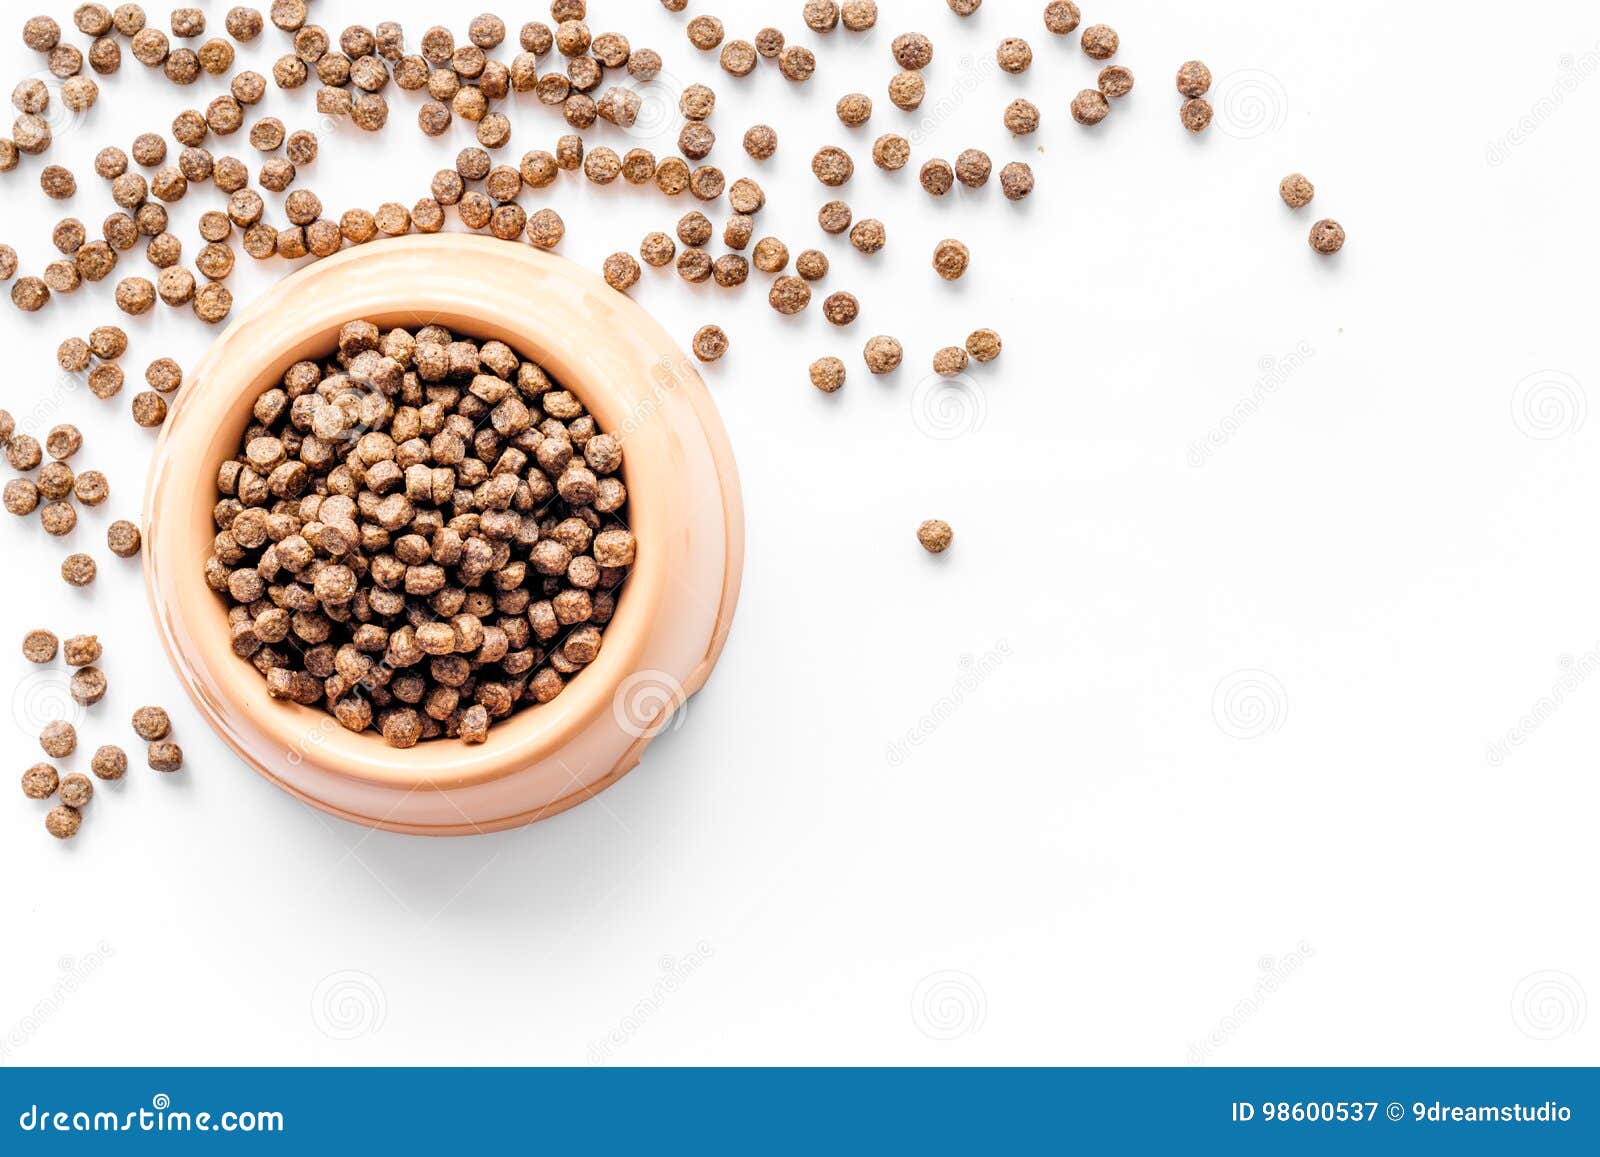 Download Large Bowl Of Pet - Dog Food Spilling On White Background Top View Mockup Stock Image - Image of ...